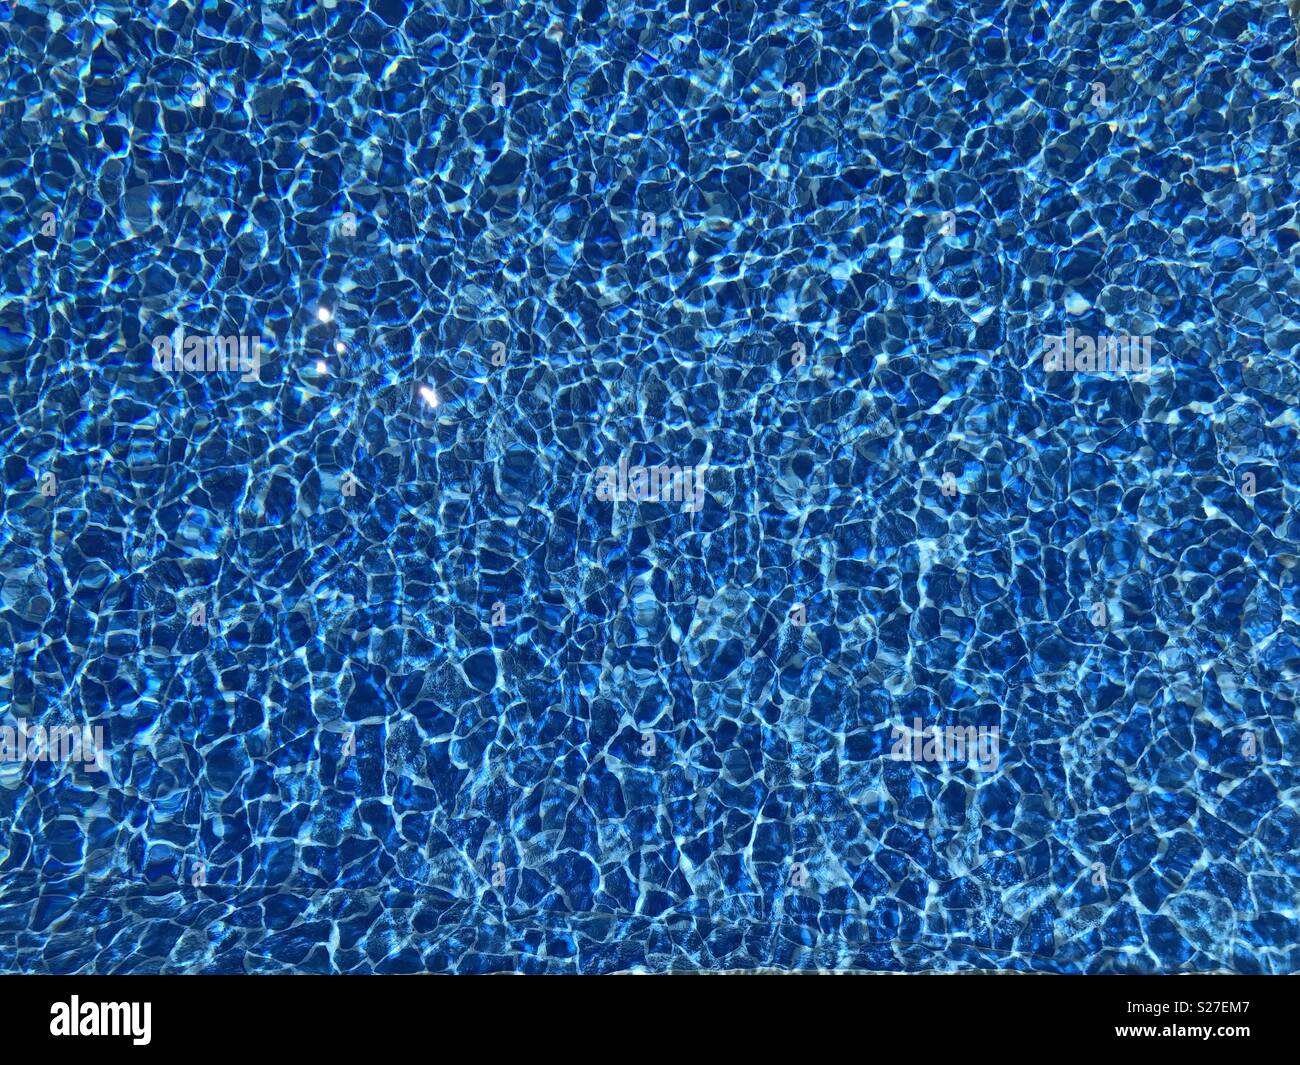 Light reflecting on water in an outdoor swimming pool Stock Photo